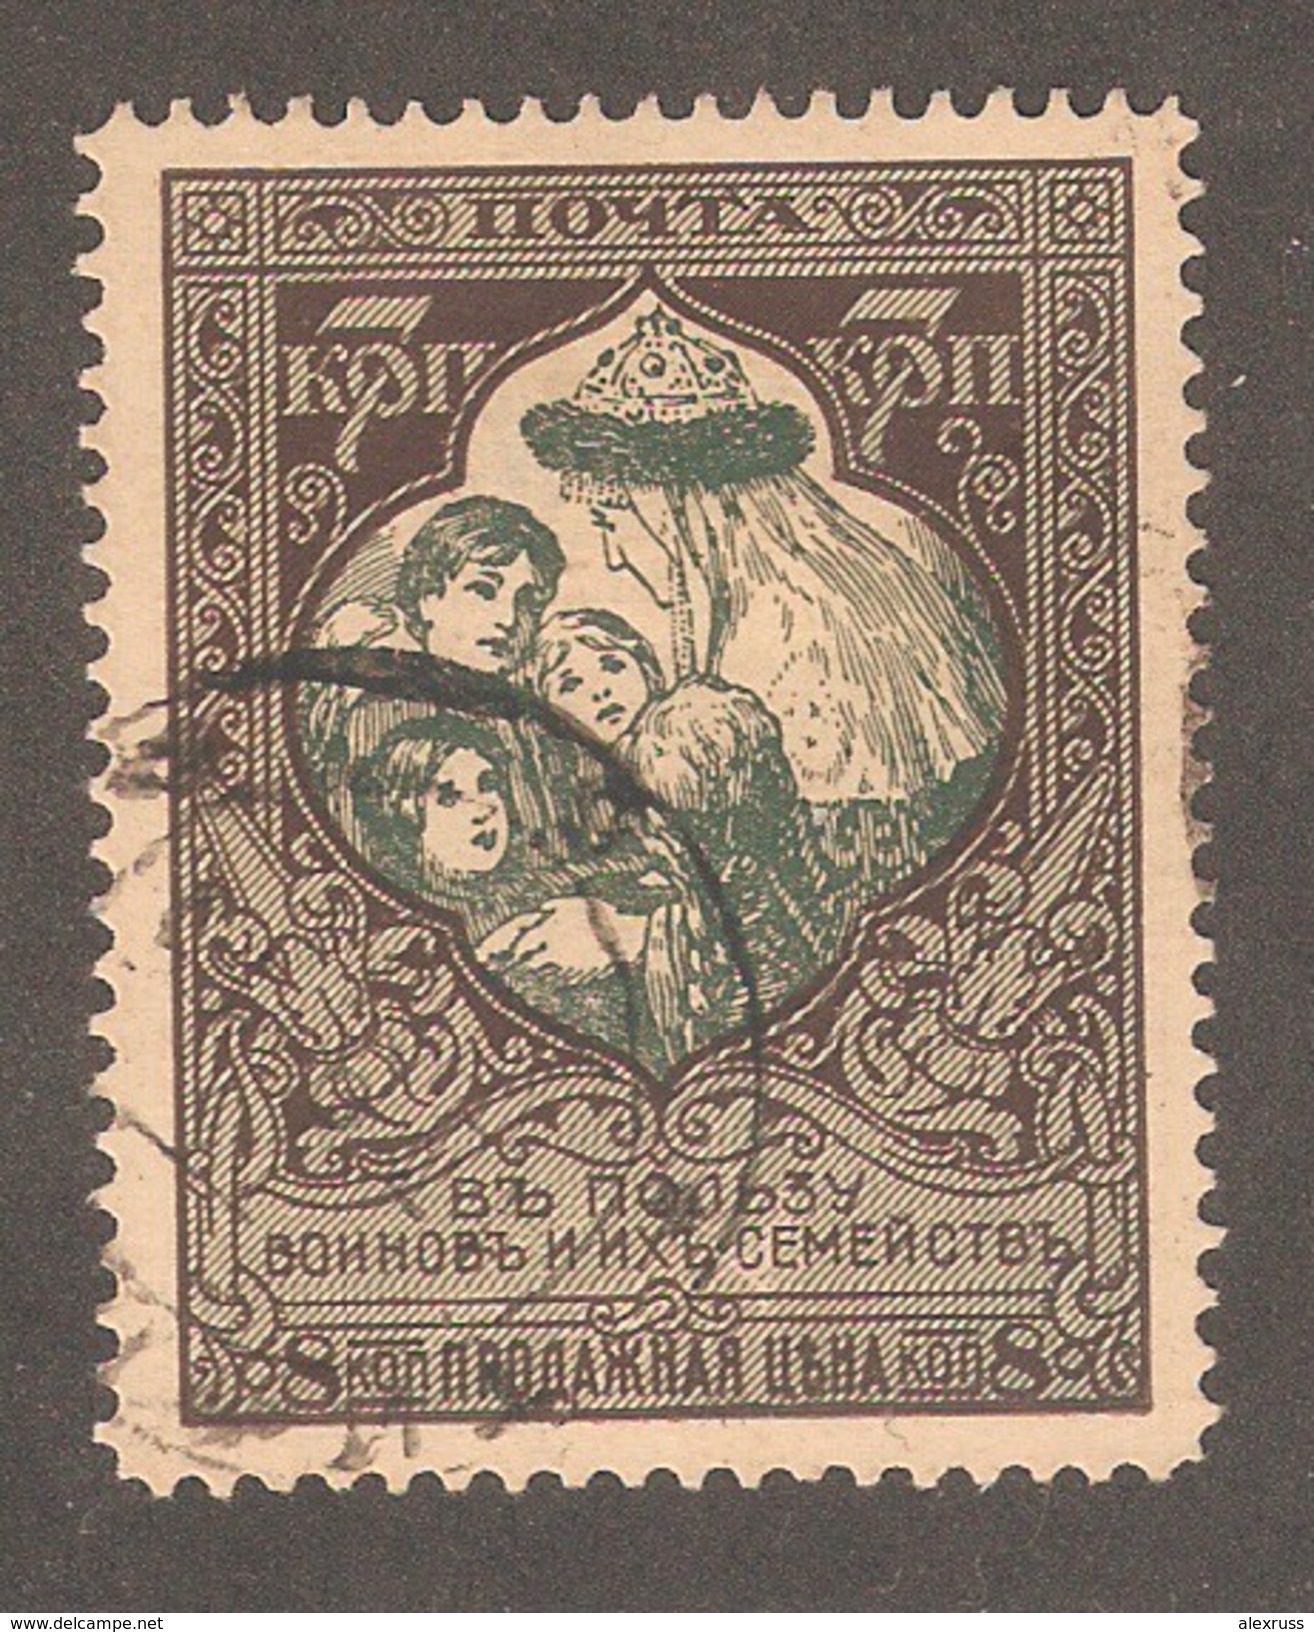 Russia 1914, WW-I Charity Issue 7 Kop, Perf 11 1/2, Mi 101A, VF USED - Unused Stamps